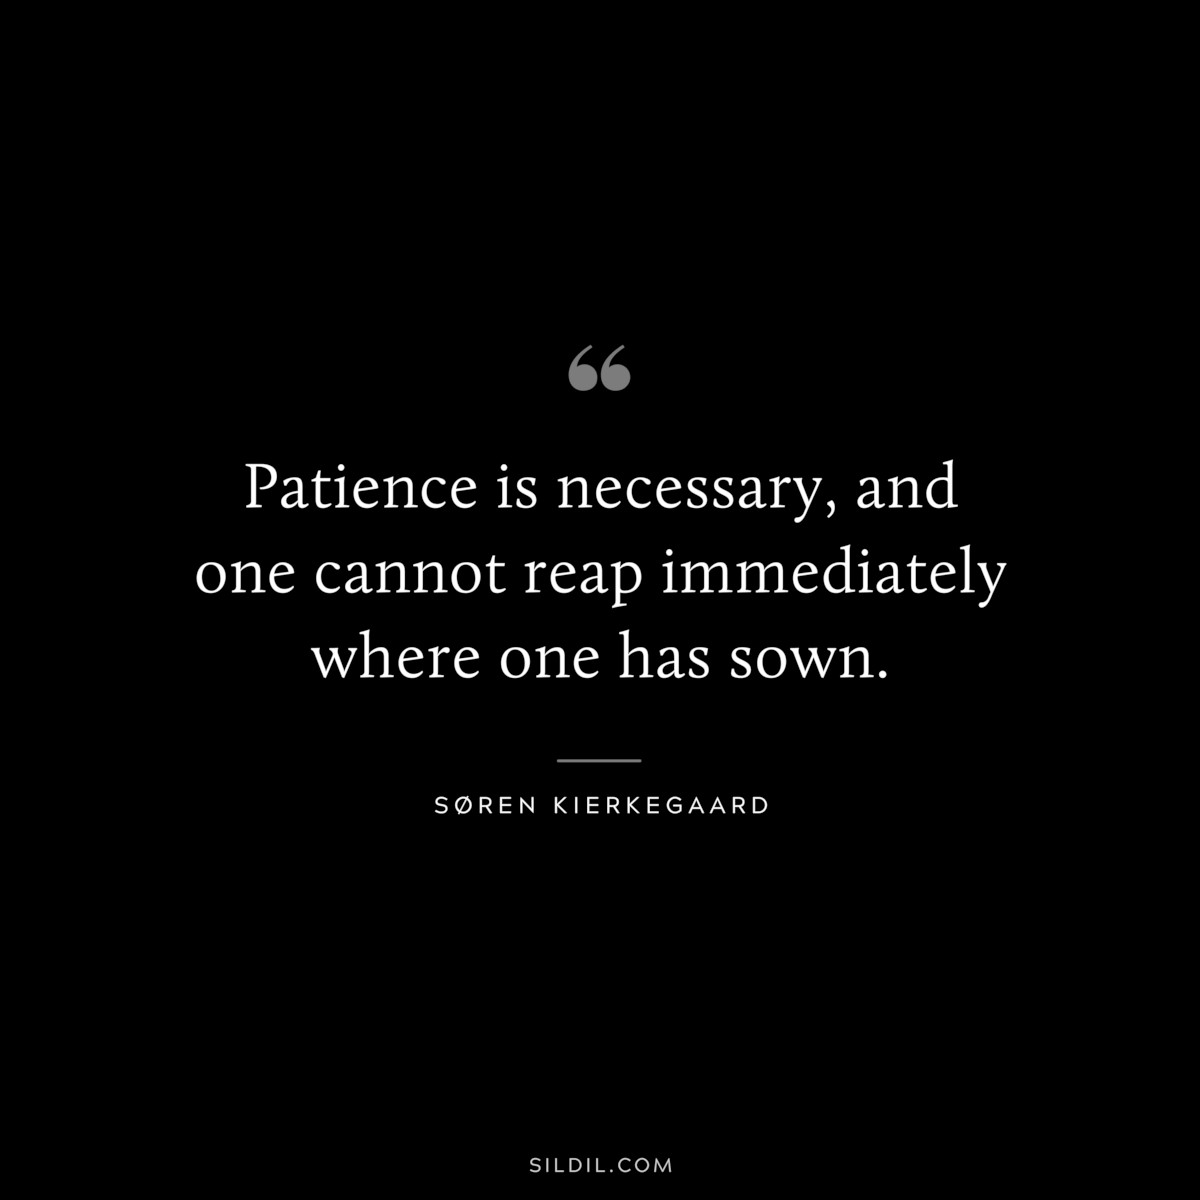 Patience is necessary, and one cannot reap immediately where one has sown. ― Søren Kierkegaard